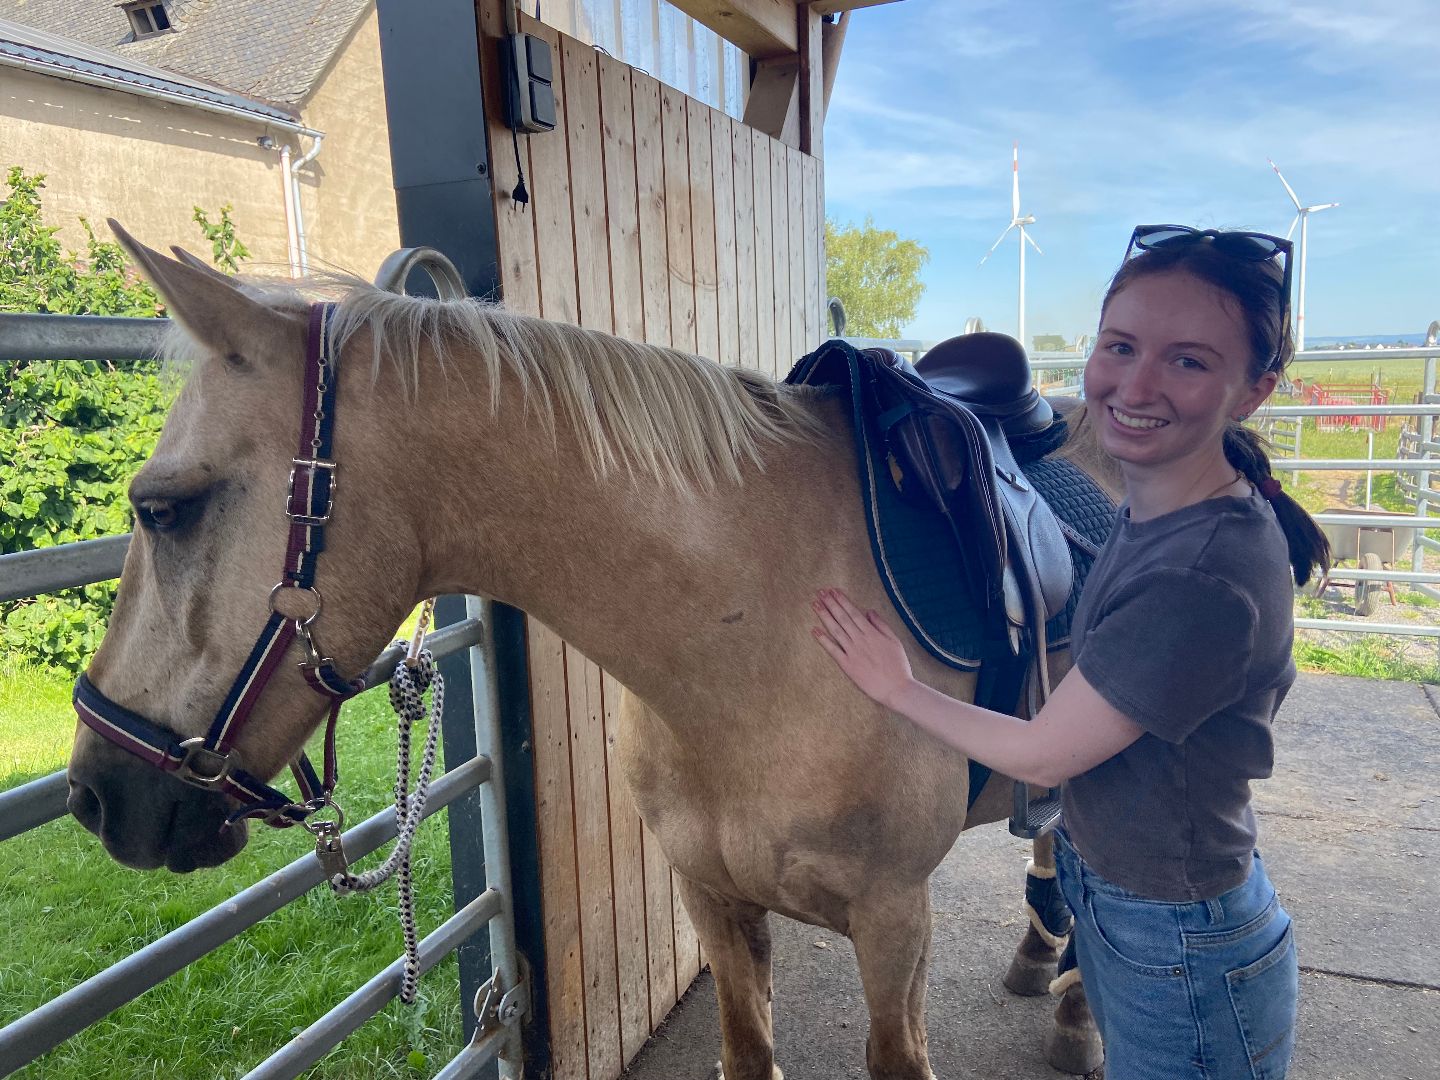 Ellie petting a tan-colored horse in Germany